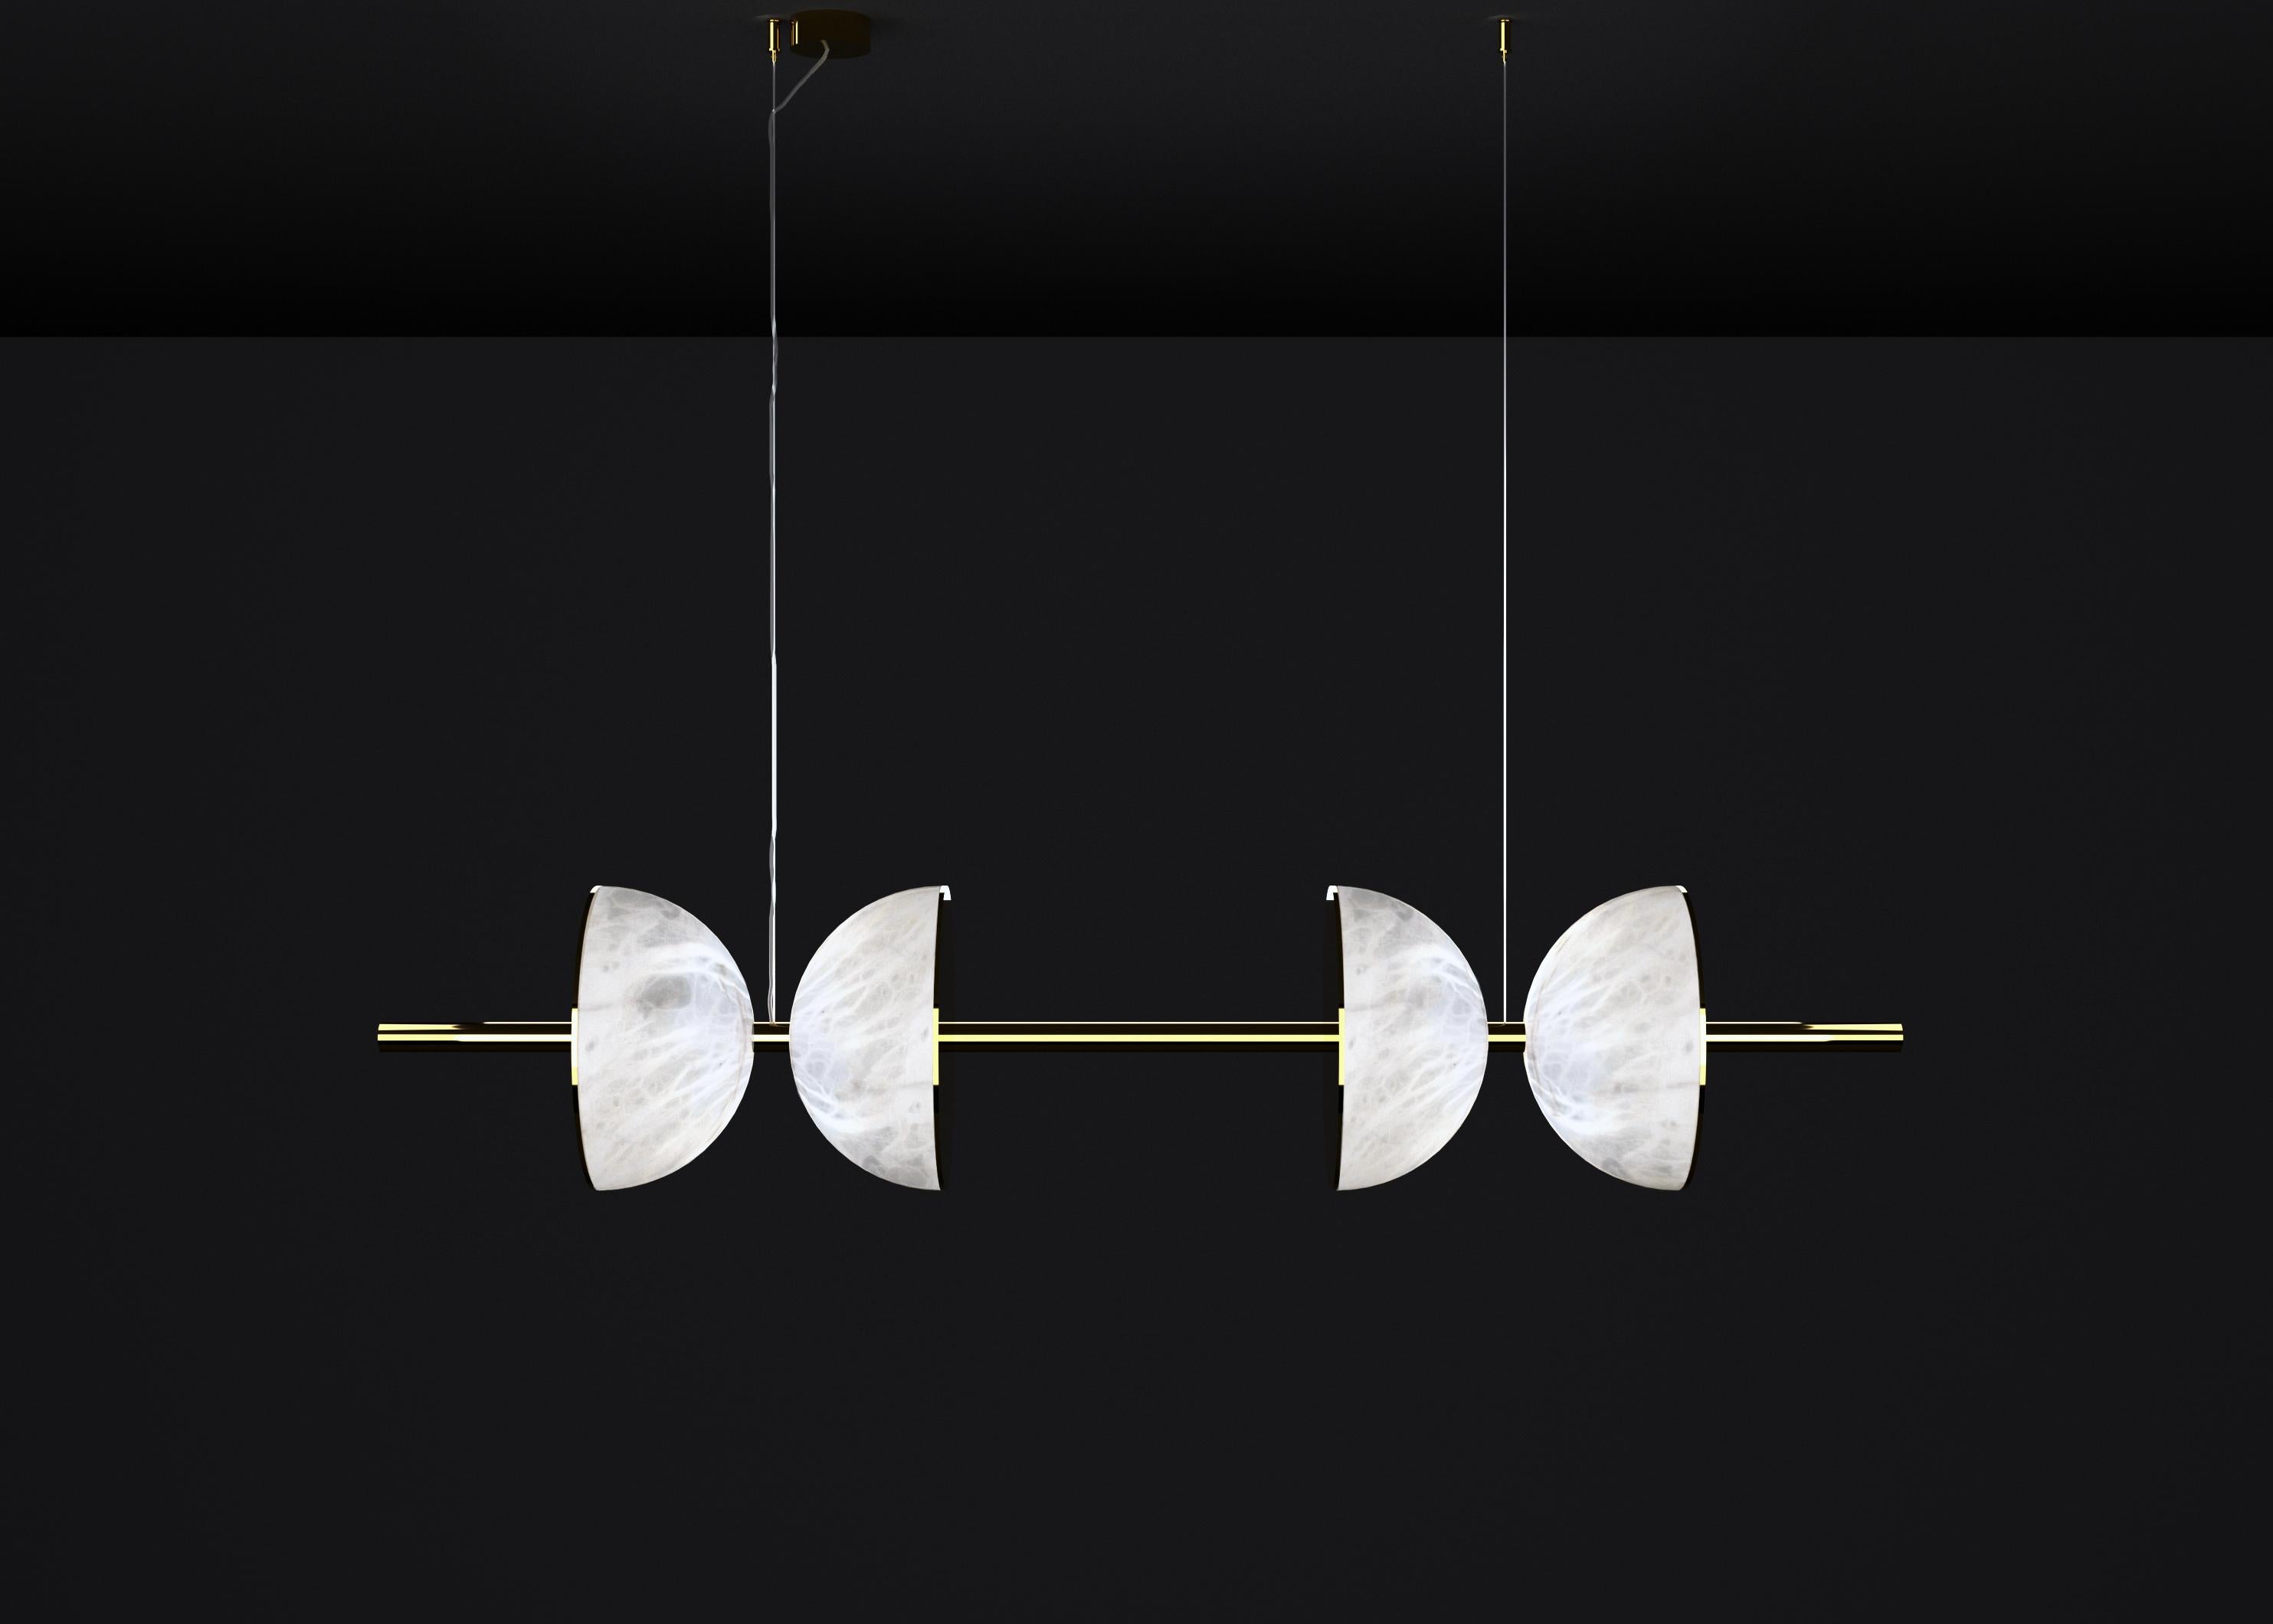 Ermes Shiny Gold Metal And Alabaster Pendant Light 2 by Alabastro Italiano
Dimensions: D 30 x W 150 x H 300 cm.
Materials: White alabaster and shiny gold metal.

Available in different finishes: Shiny Silver, Bronze, Brushed Brass, Ruggine of